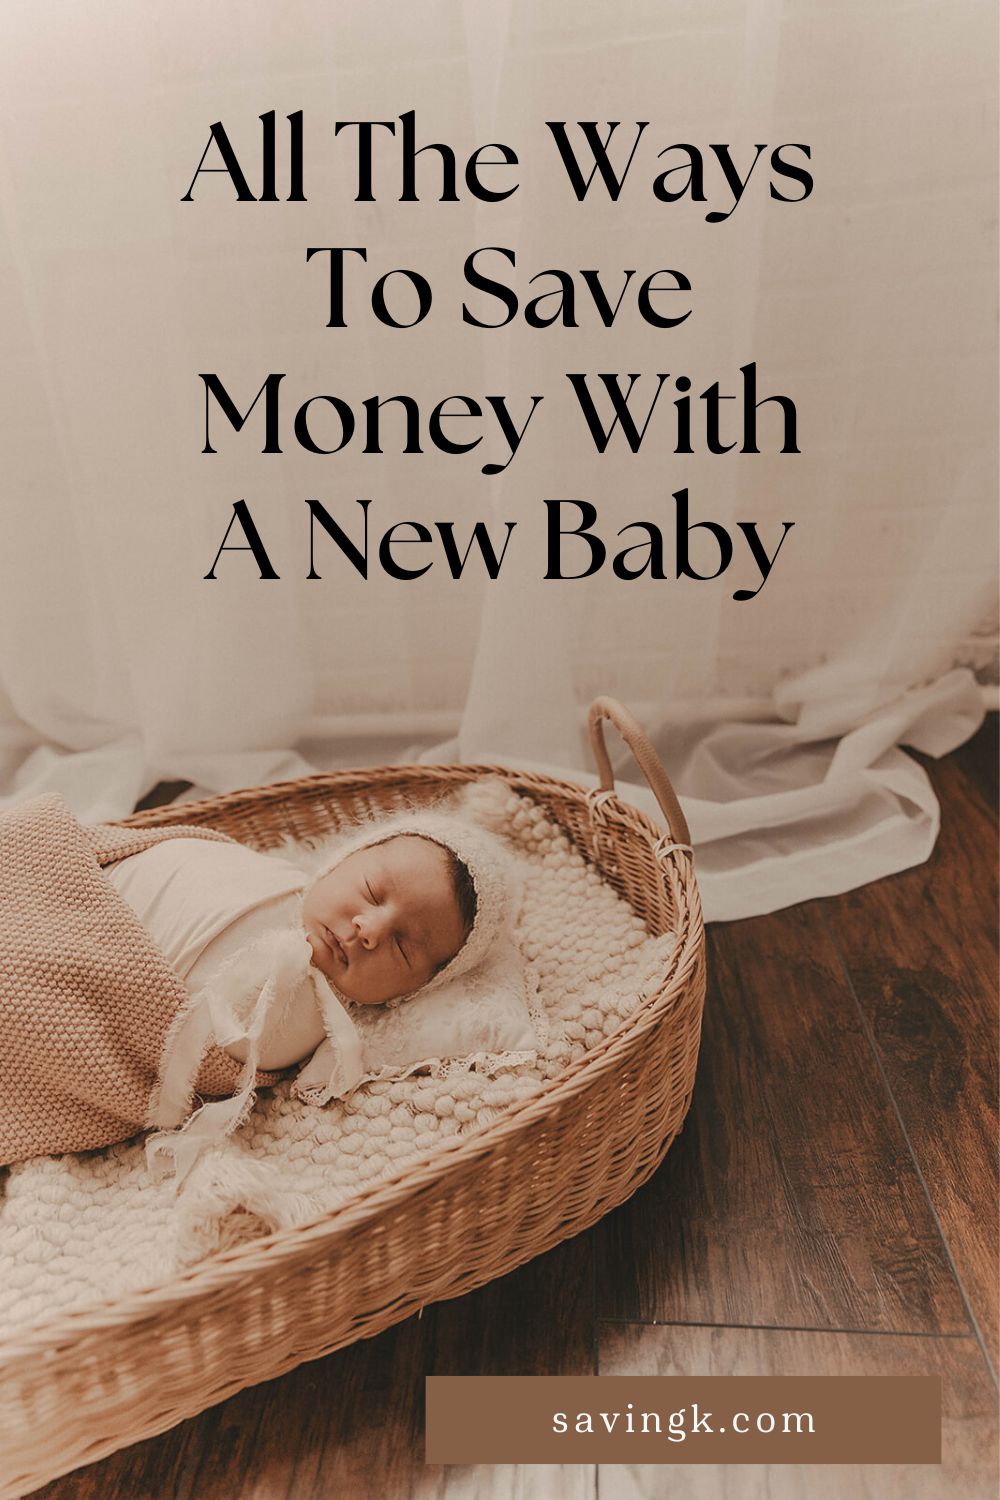 All The Ways To Save Money With A New Baby